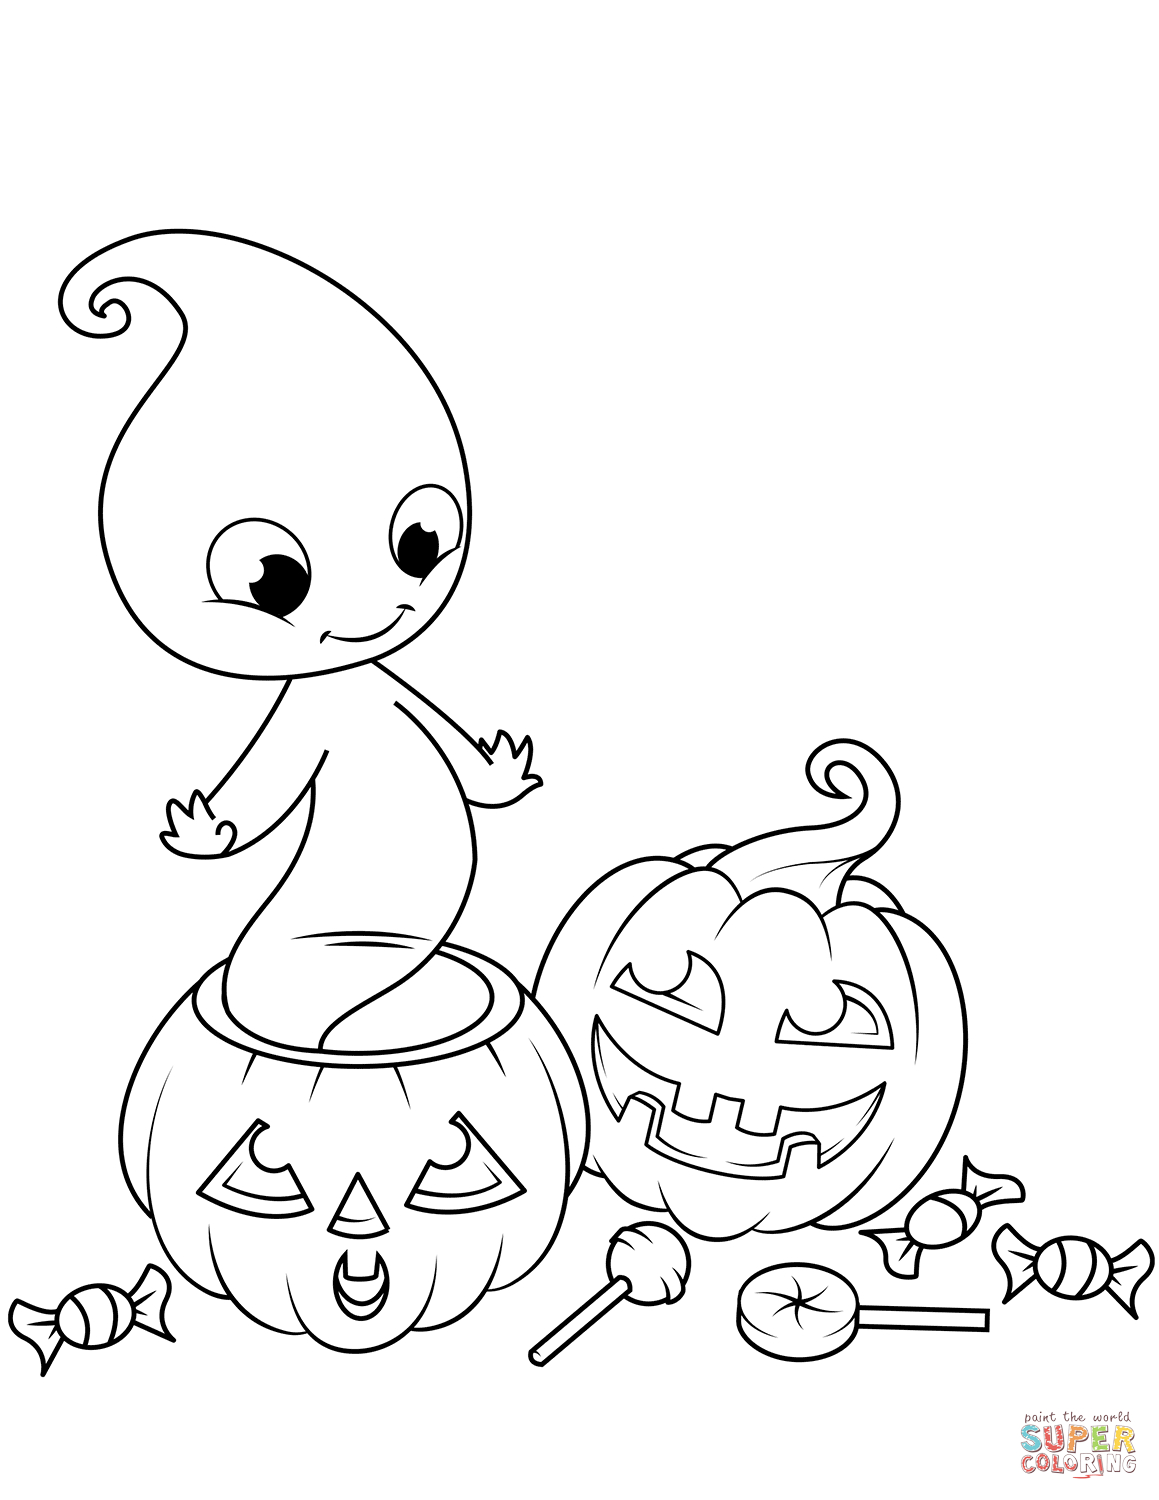 Happy Jack O Lantern Coloring Pages Cute Ghost From Jack Olantern Coloring Page Free Printable